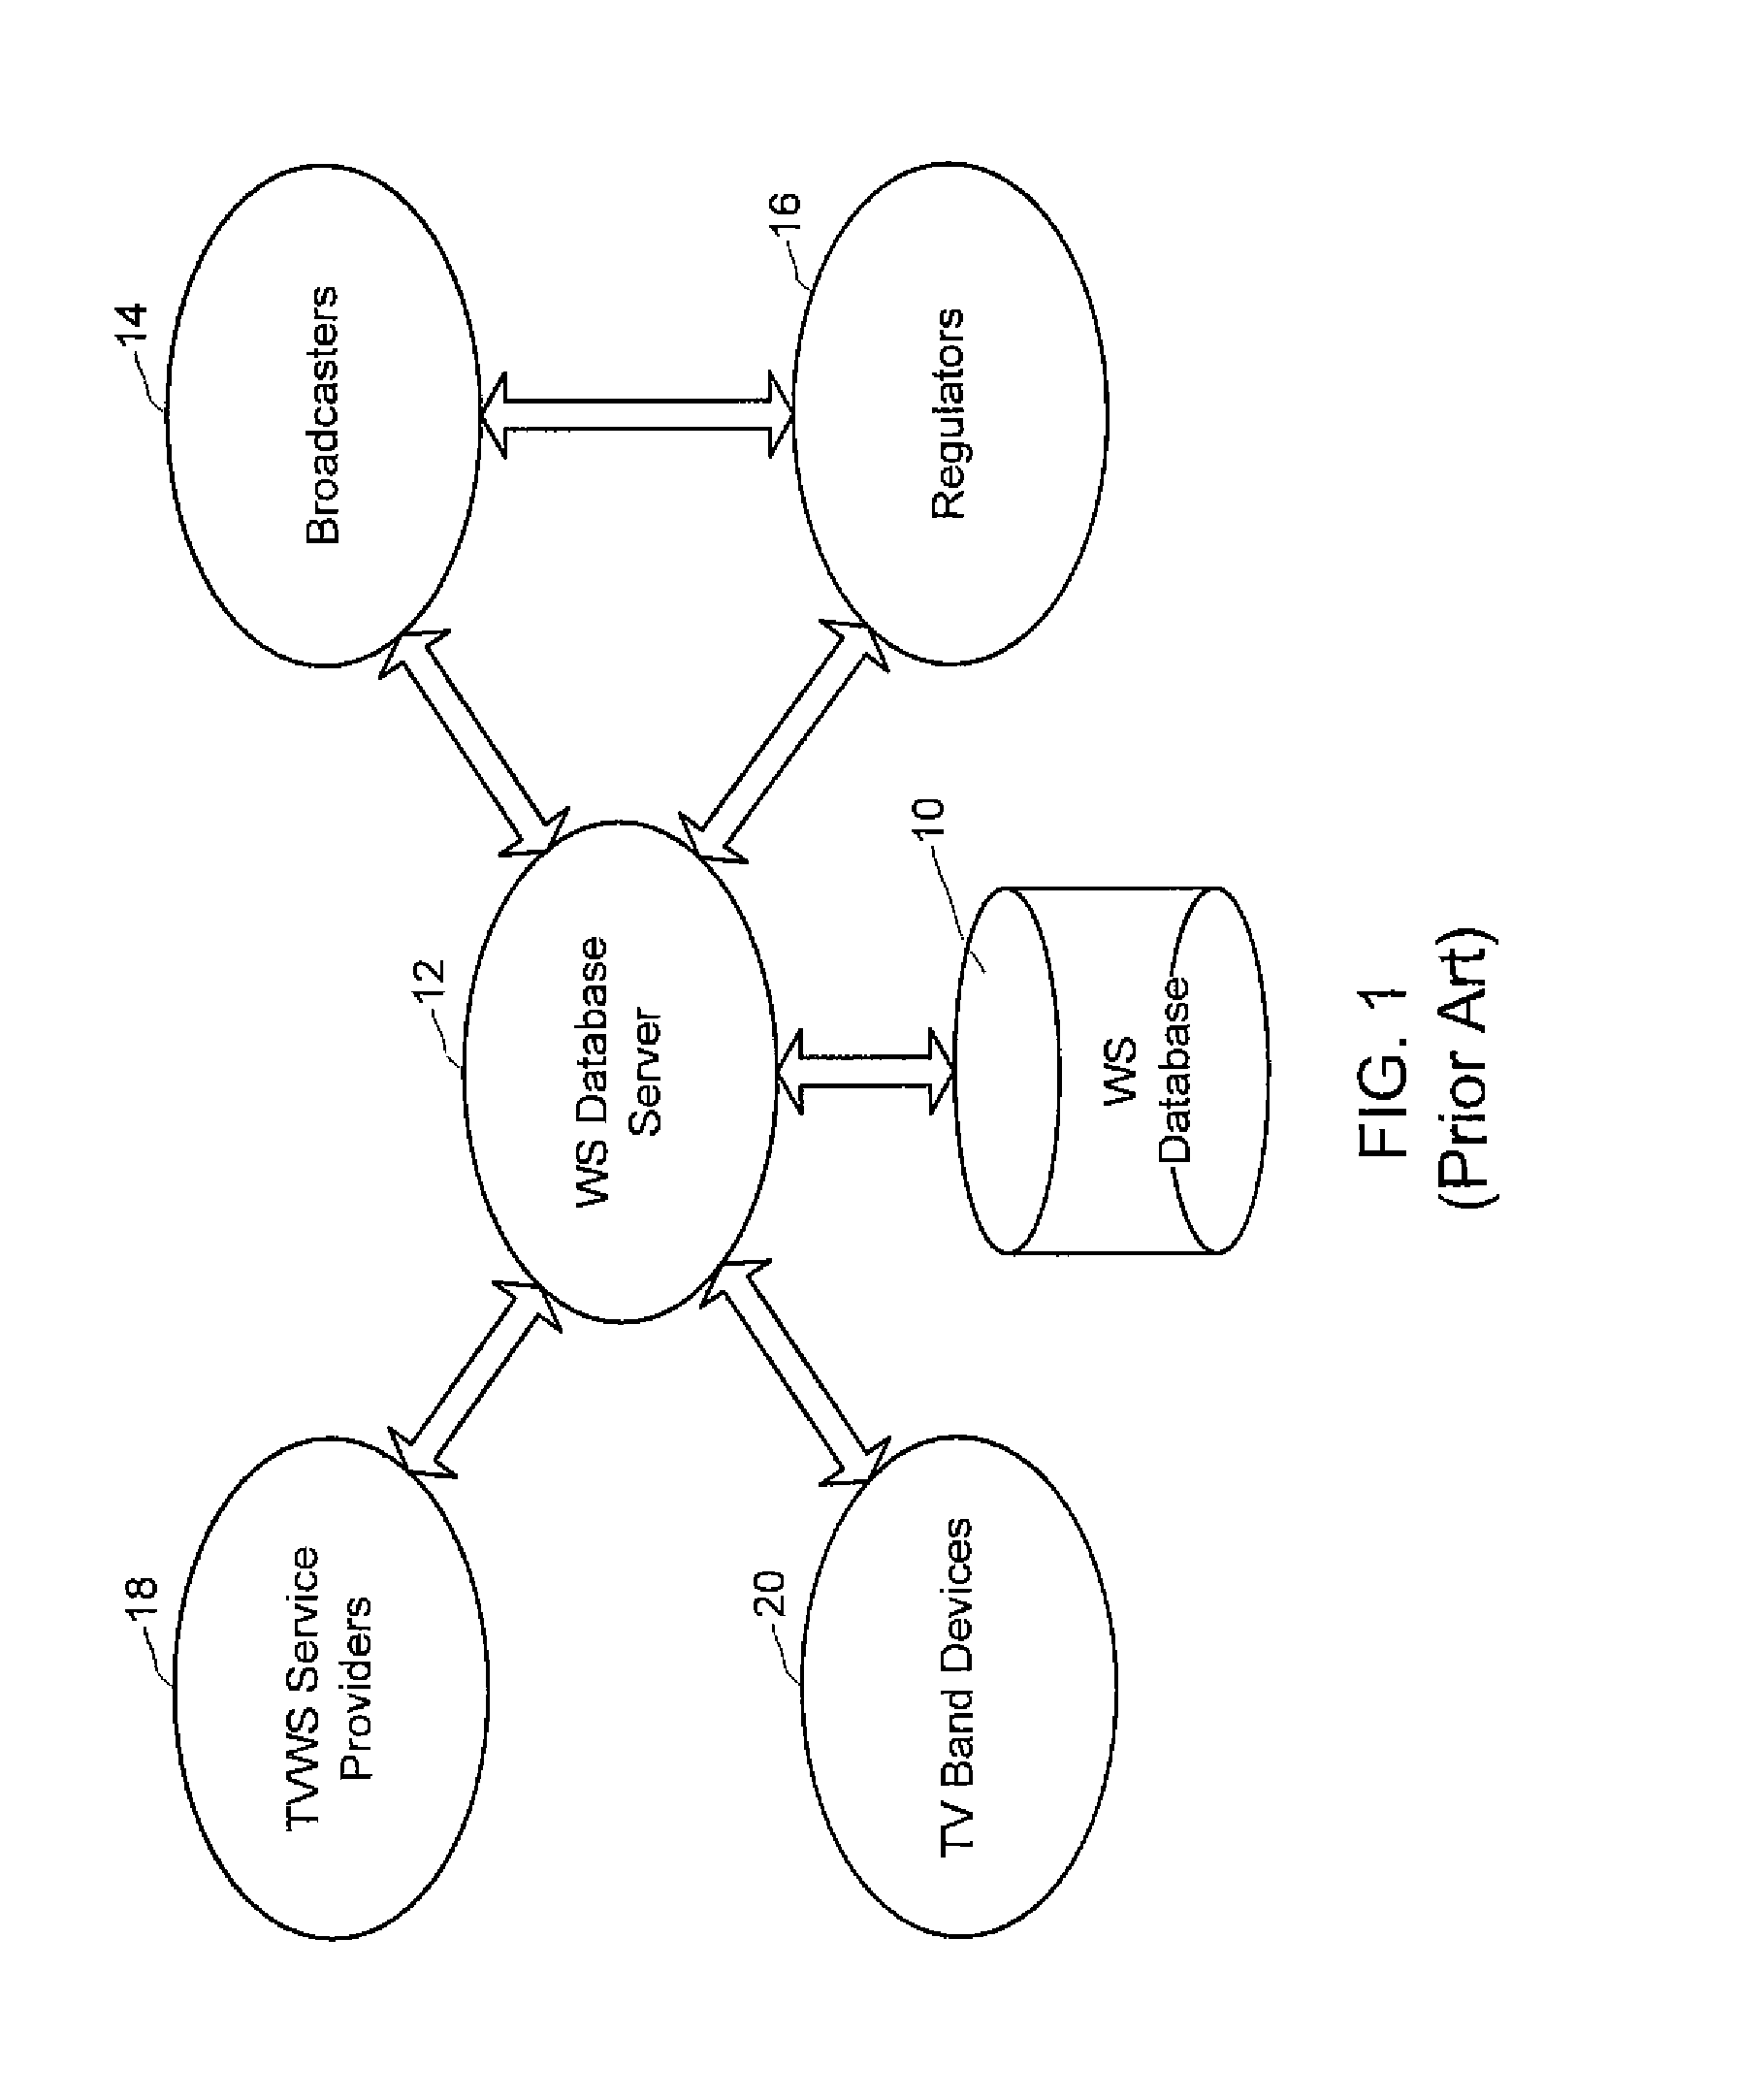 Peer-To-Peer Control Network For A Wireless Radio Access Network